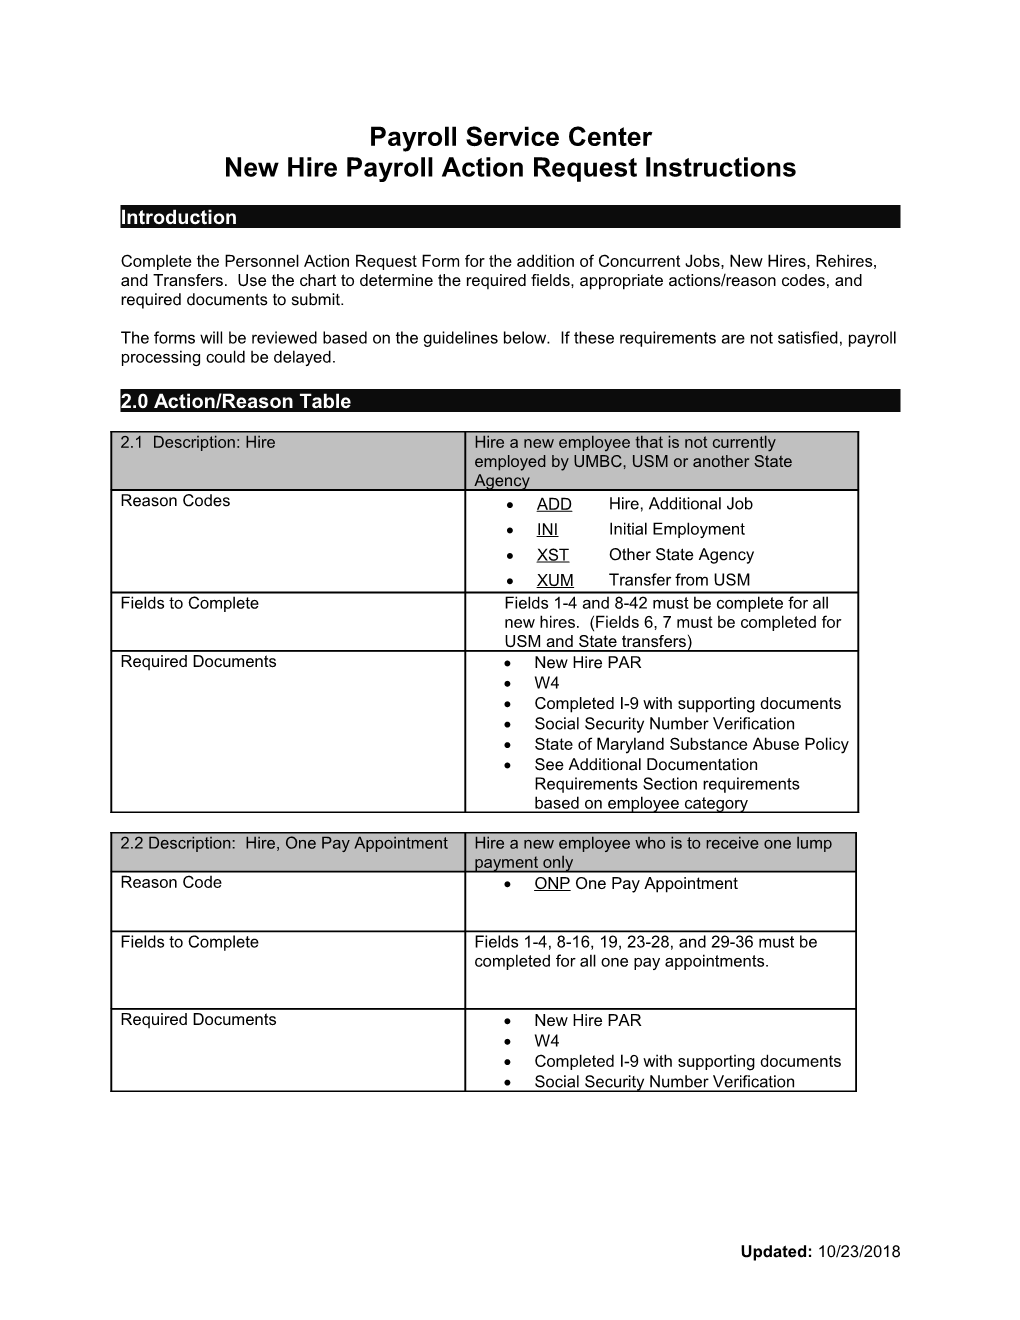 New Hire Payroll Action Request Instructions